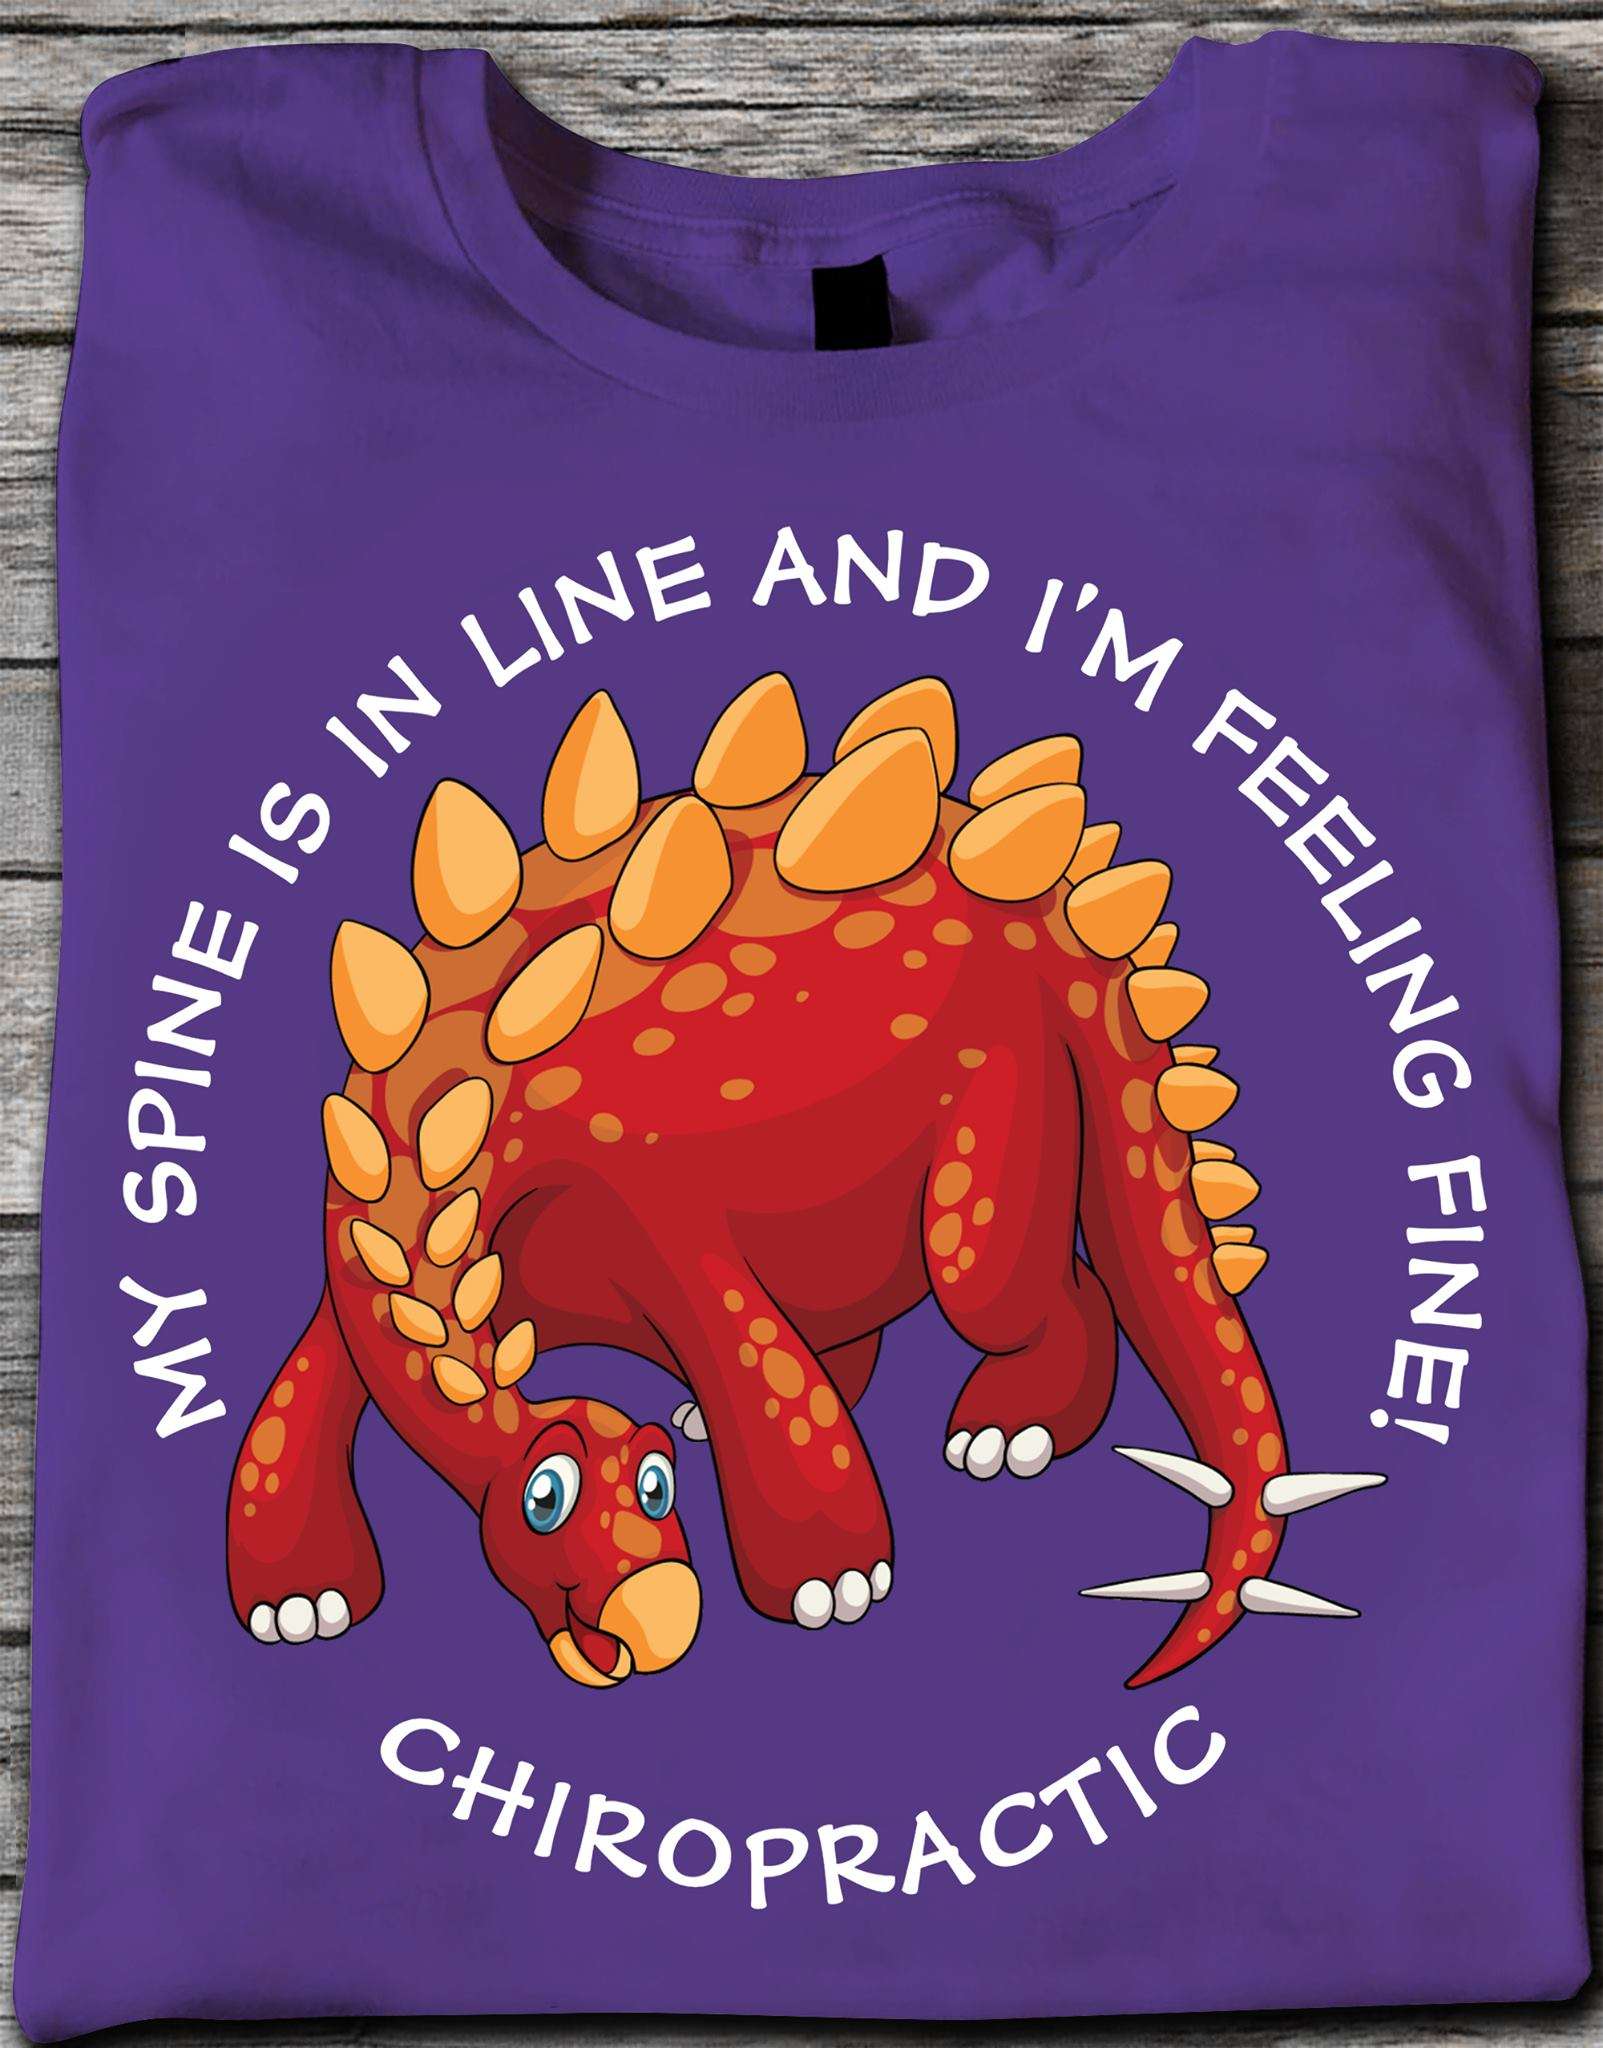 Red Dinosaur - My spine is in line and i'm feeling fine! Chiropractic